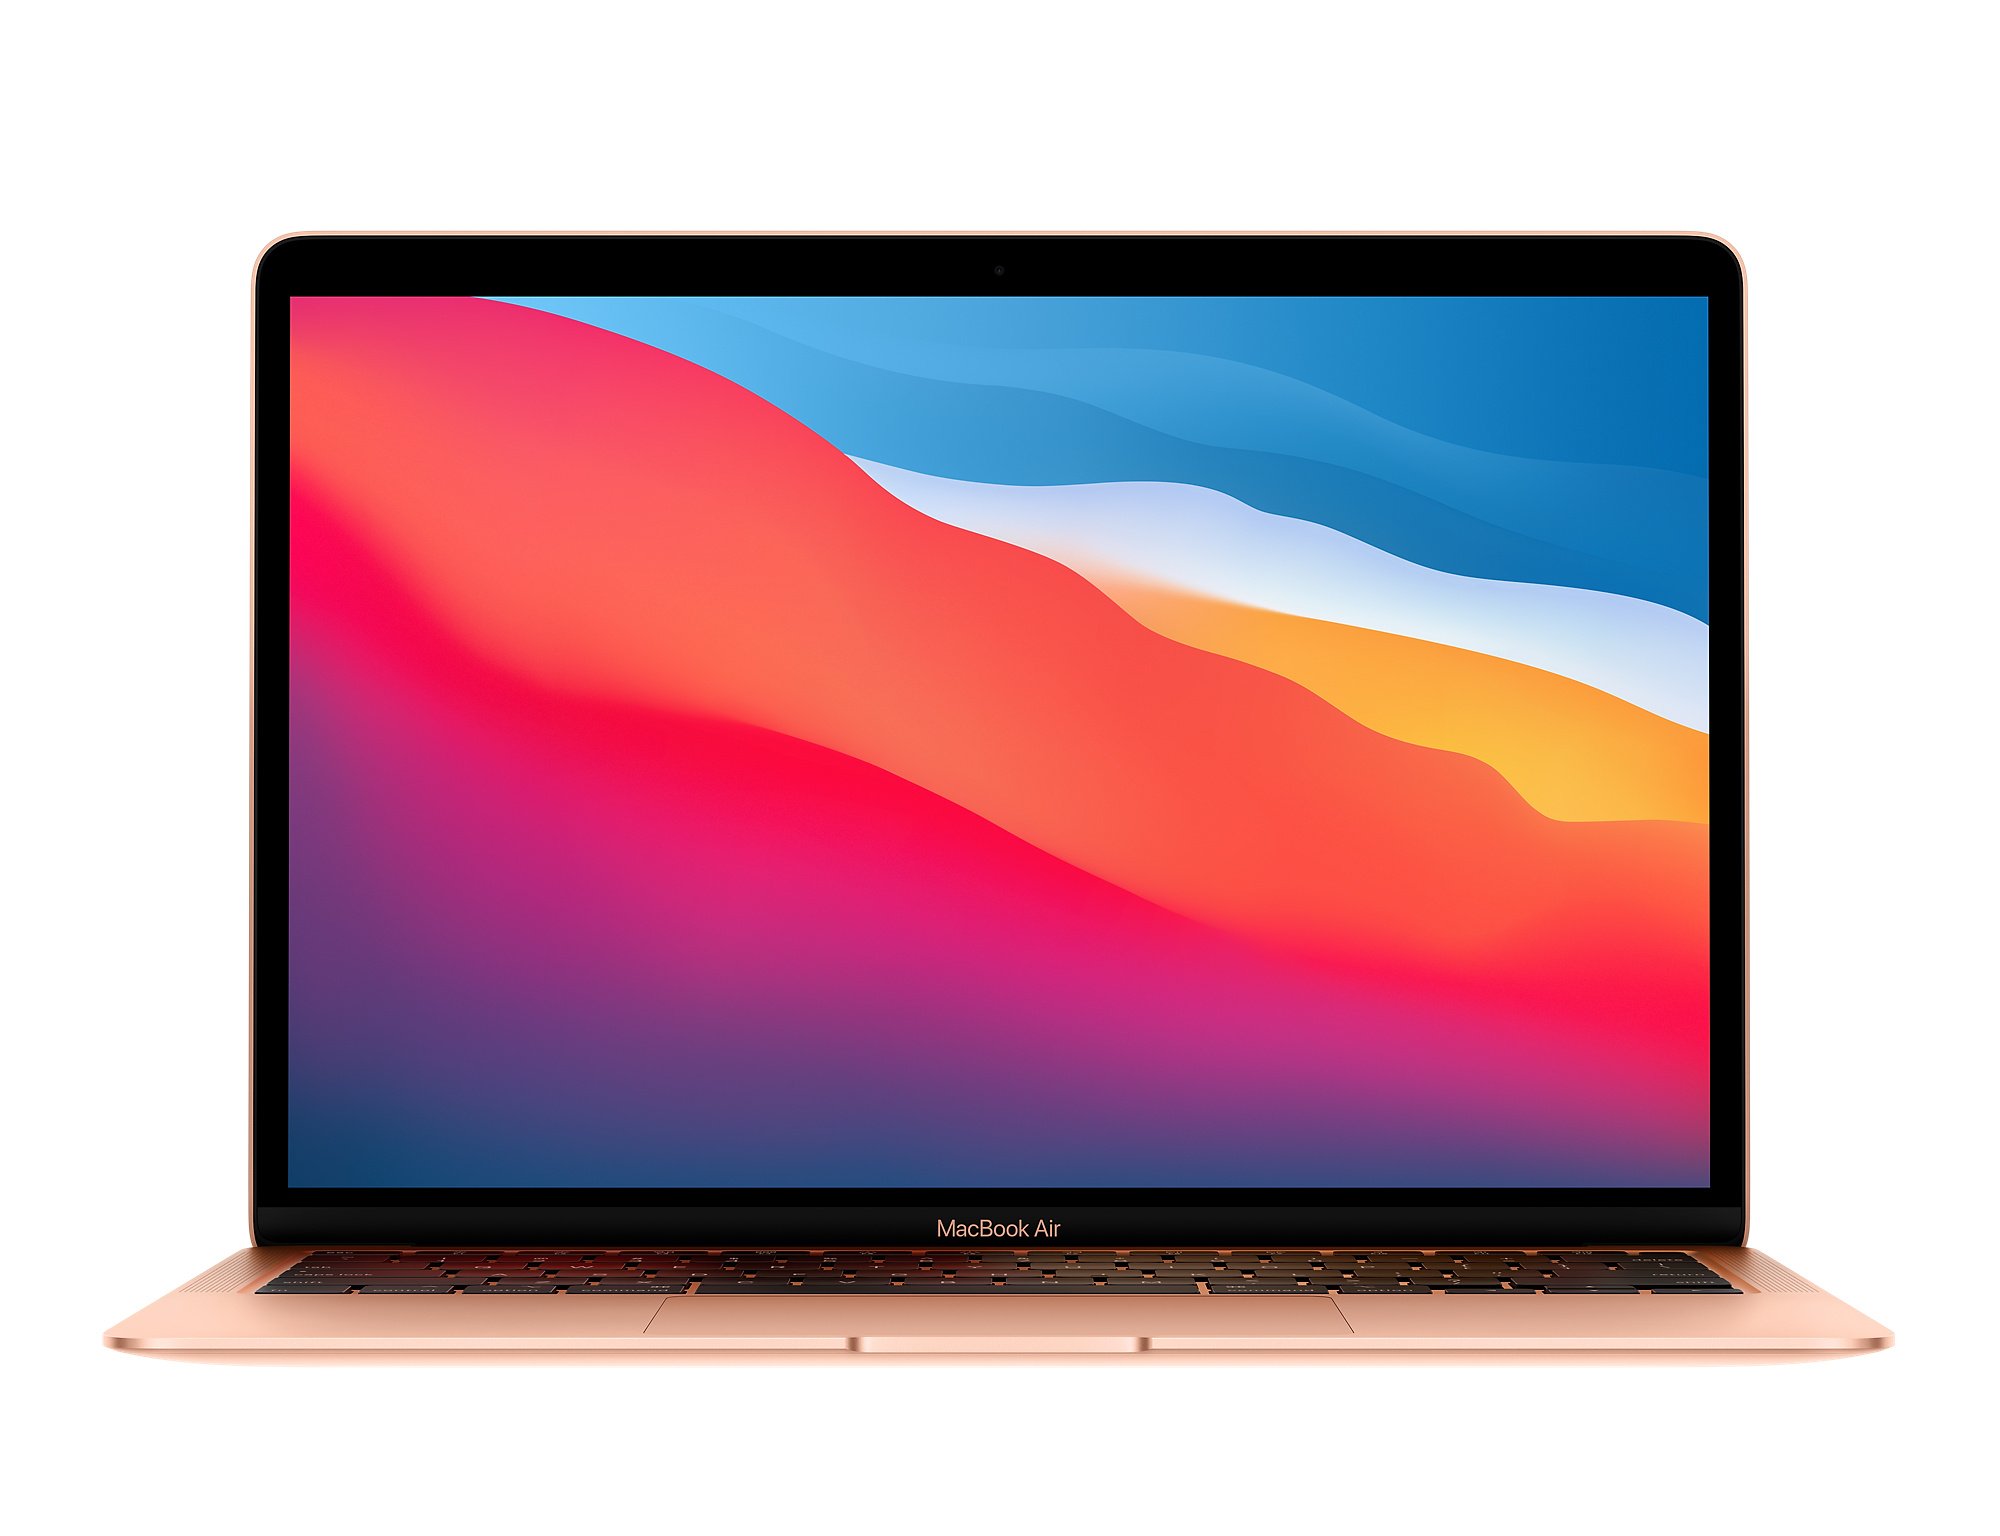 Apple announces new MacBook Air and MacBook 13 Pro with Apple M1